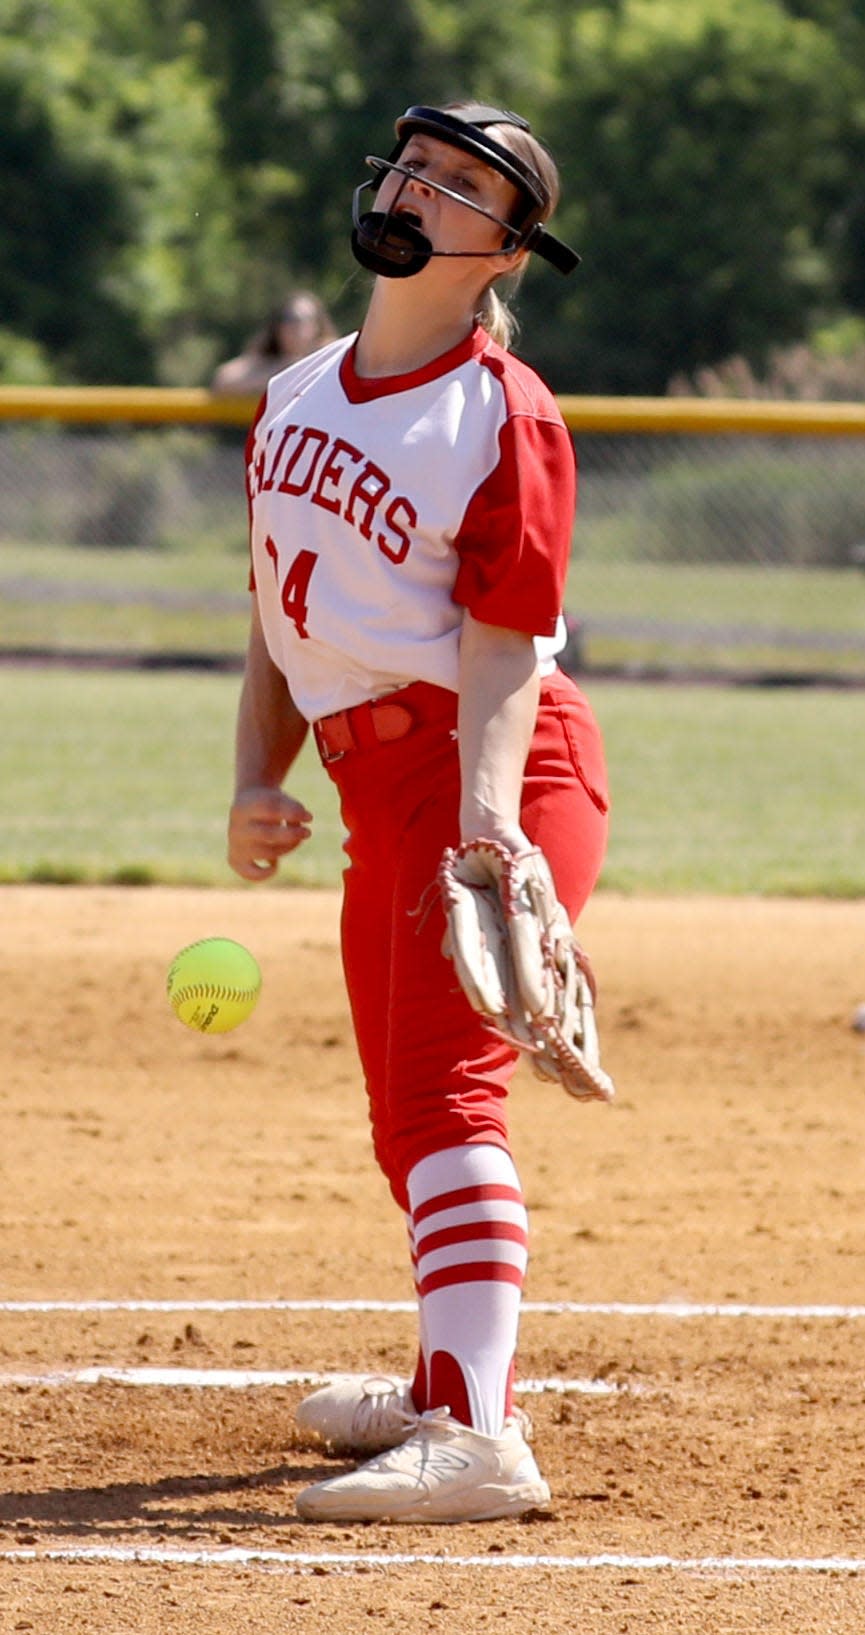 Delaney McGovern of North Rockland pitches to White Plains during the Section 1 Class AA softball championship against White Plains at North Rockland High School May 27, 2023. McGovern was the winning pitcher as North Rockland defeated White Plains 3-2.